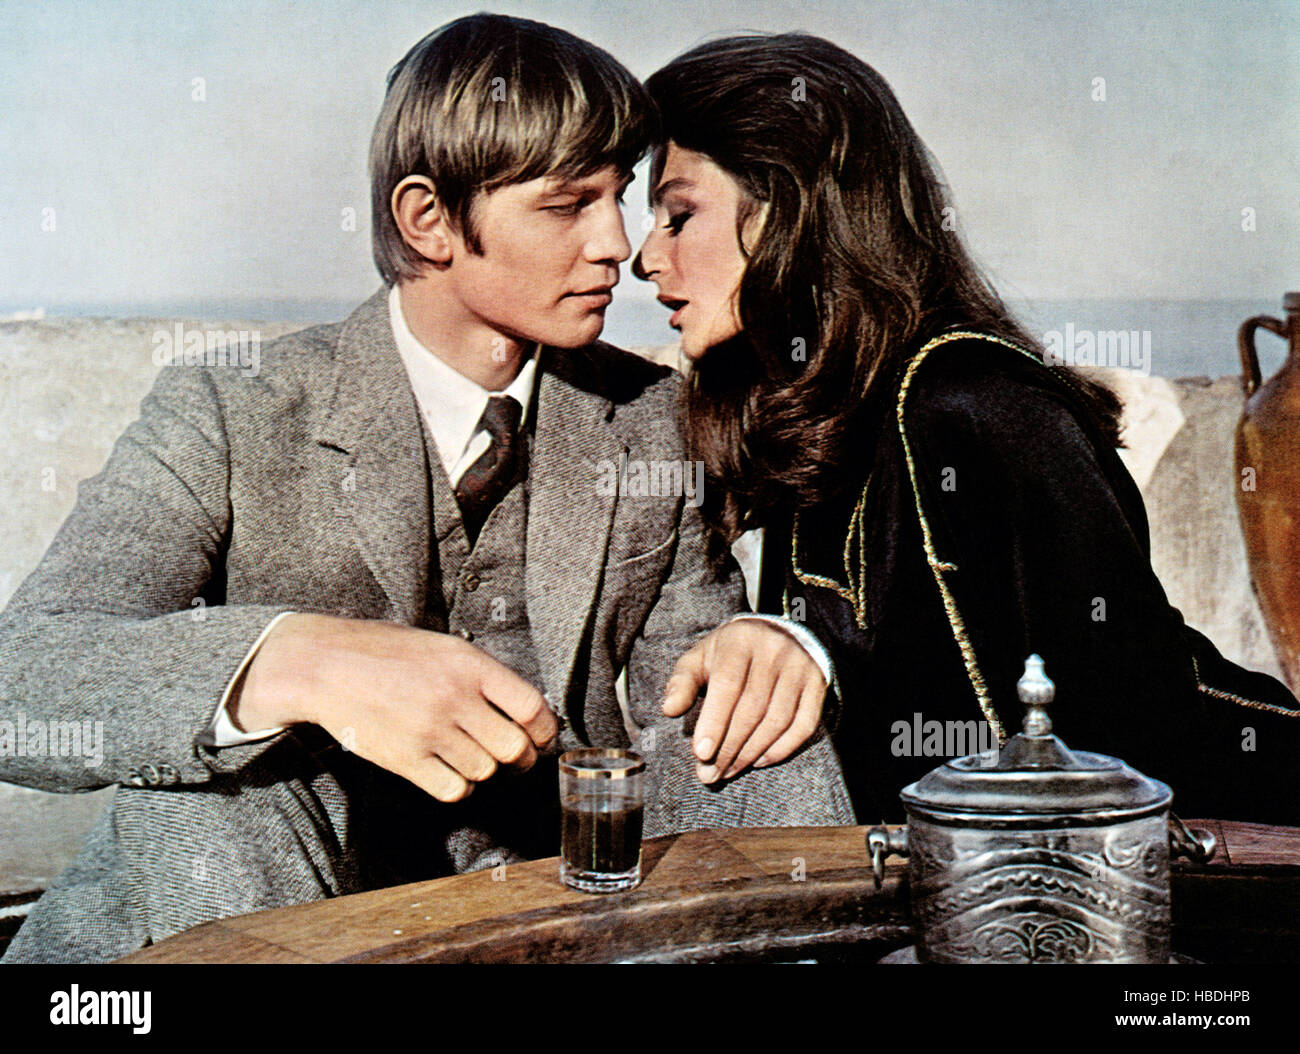 JUSTINE, from left: Michael York, Anouk Aimee, 1969 Stock Photo - Alamy